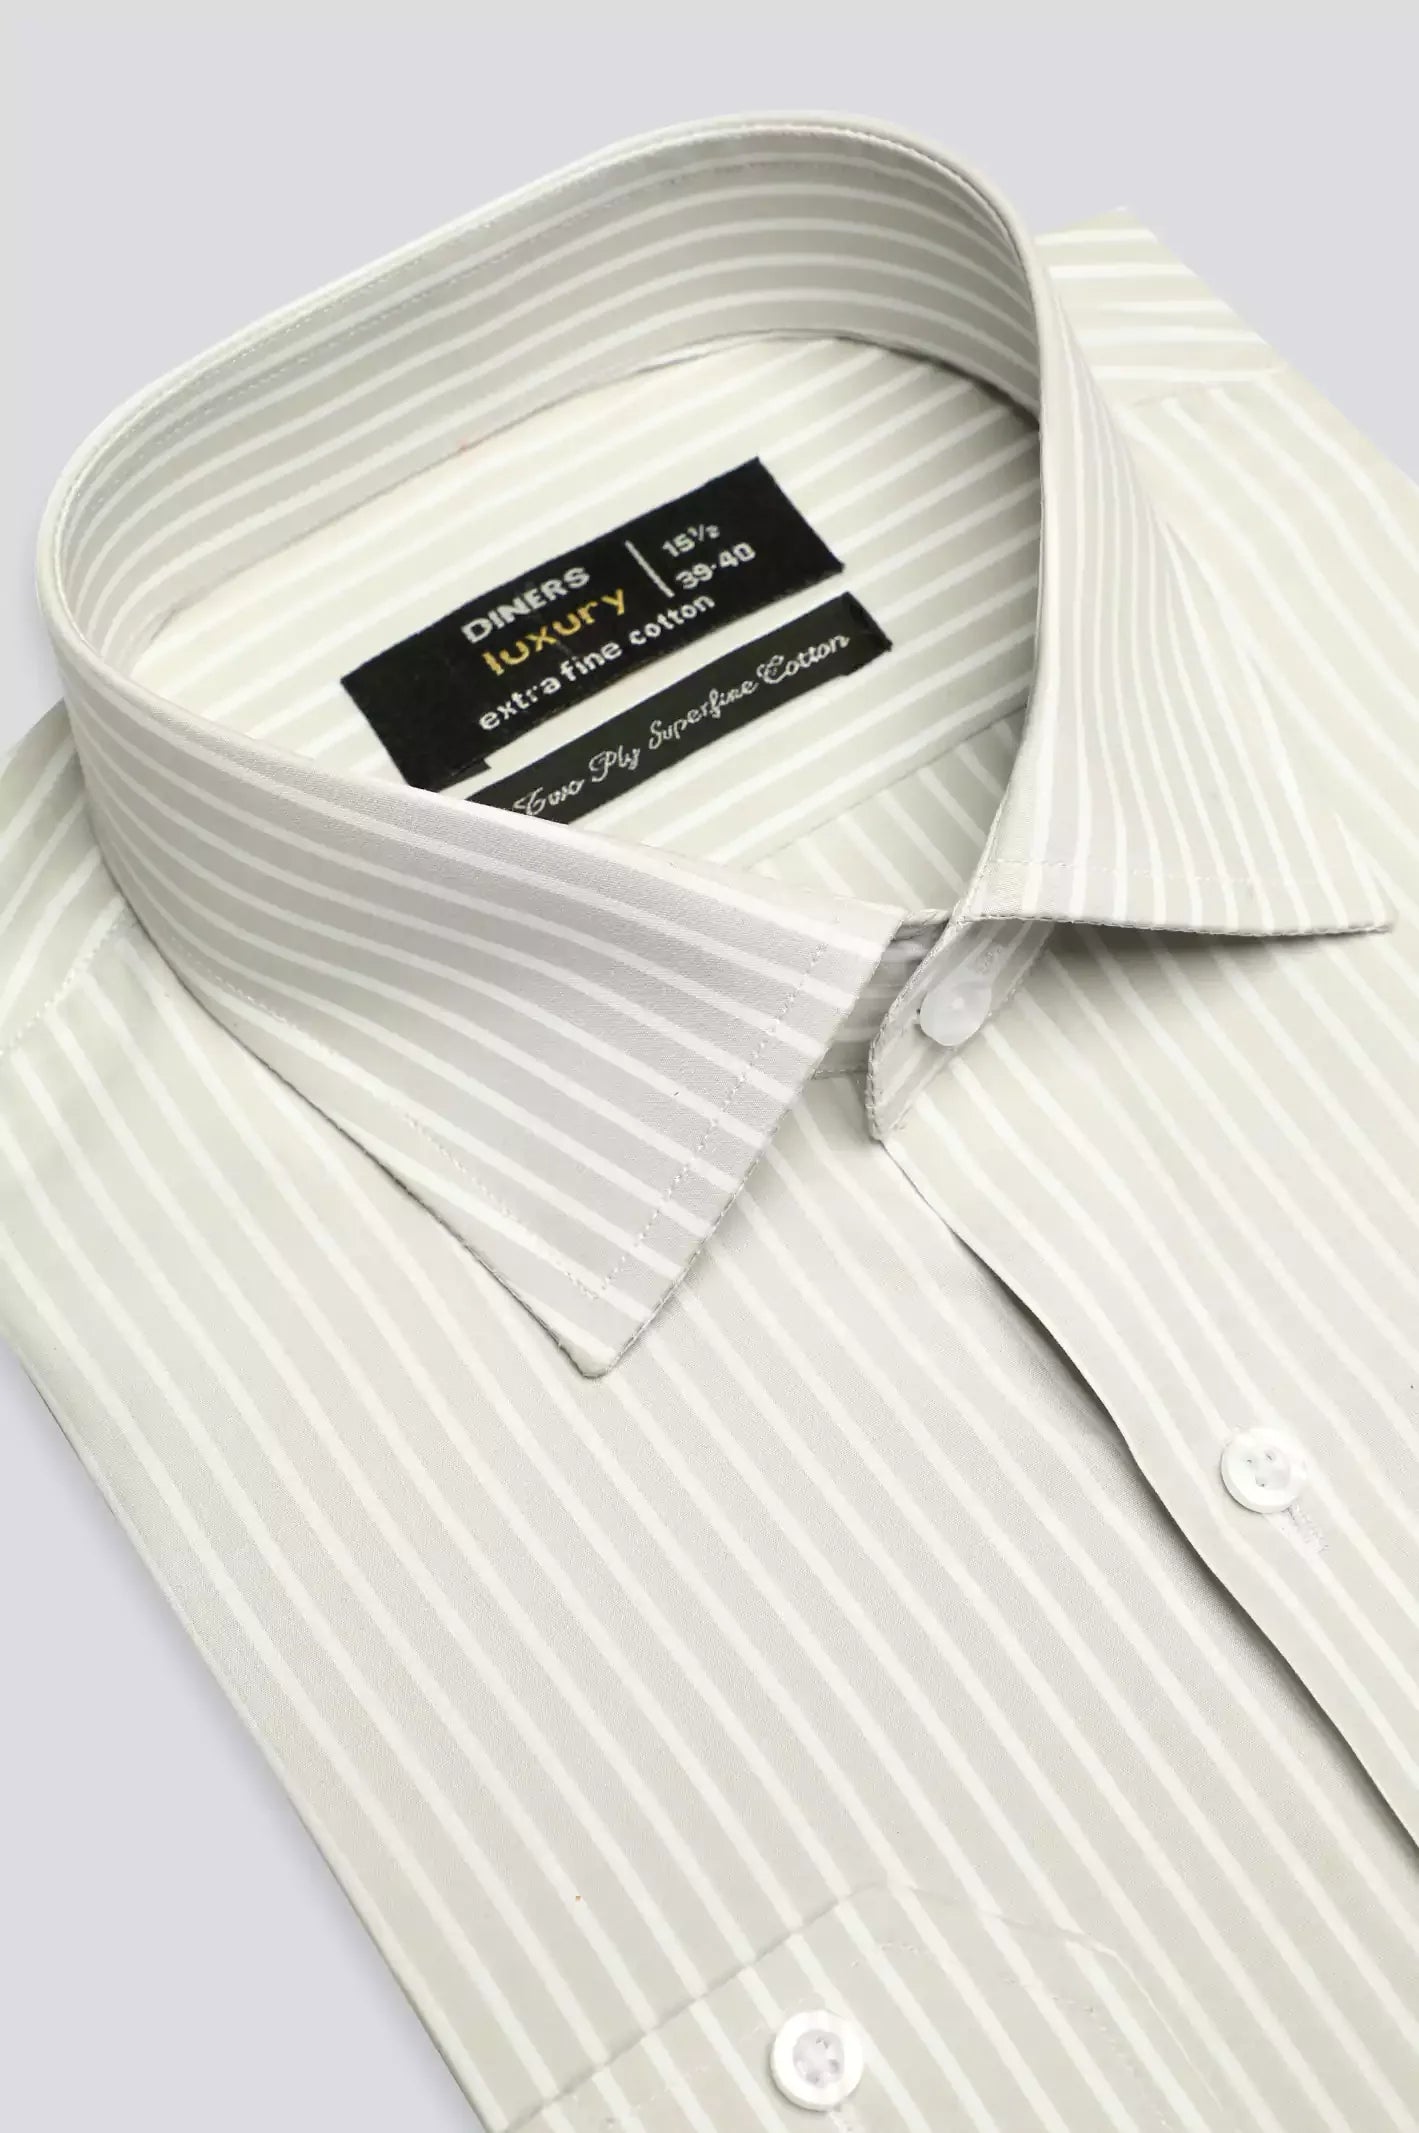 Grey Pencil Stripe Formal Shirt From Diners